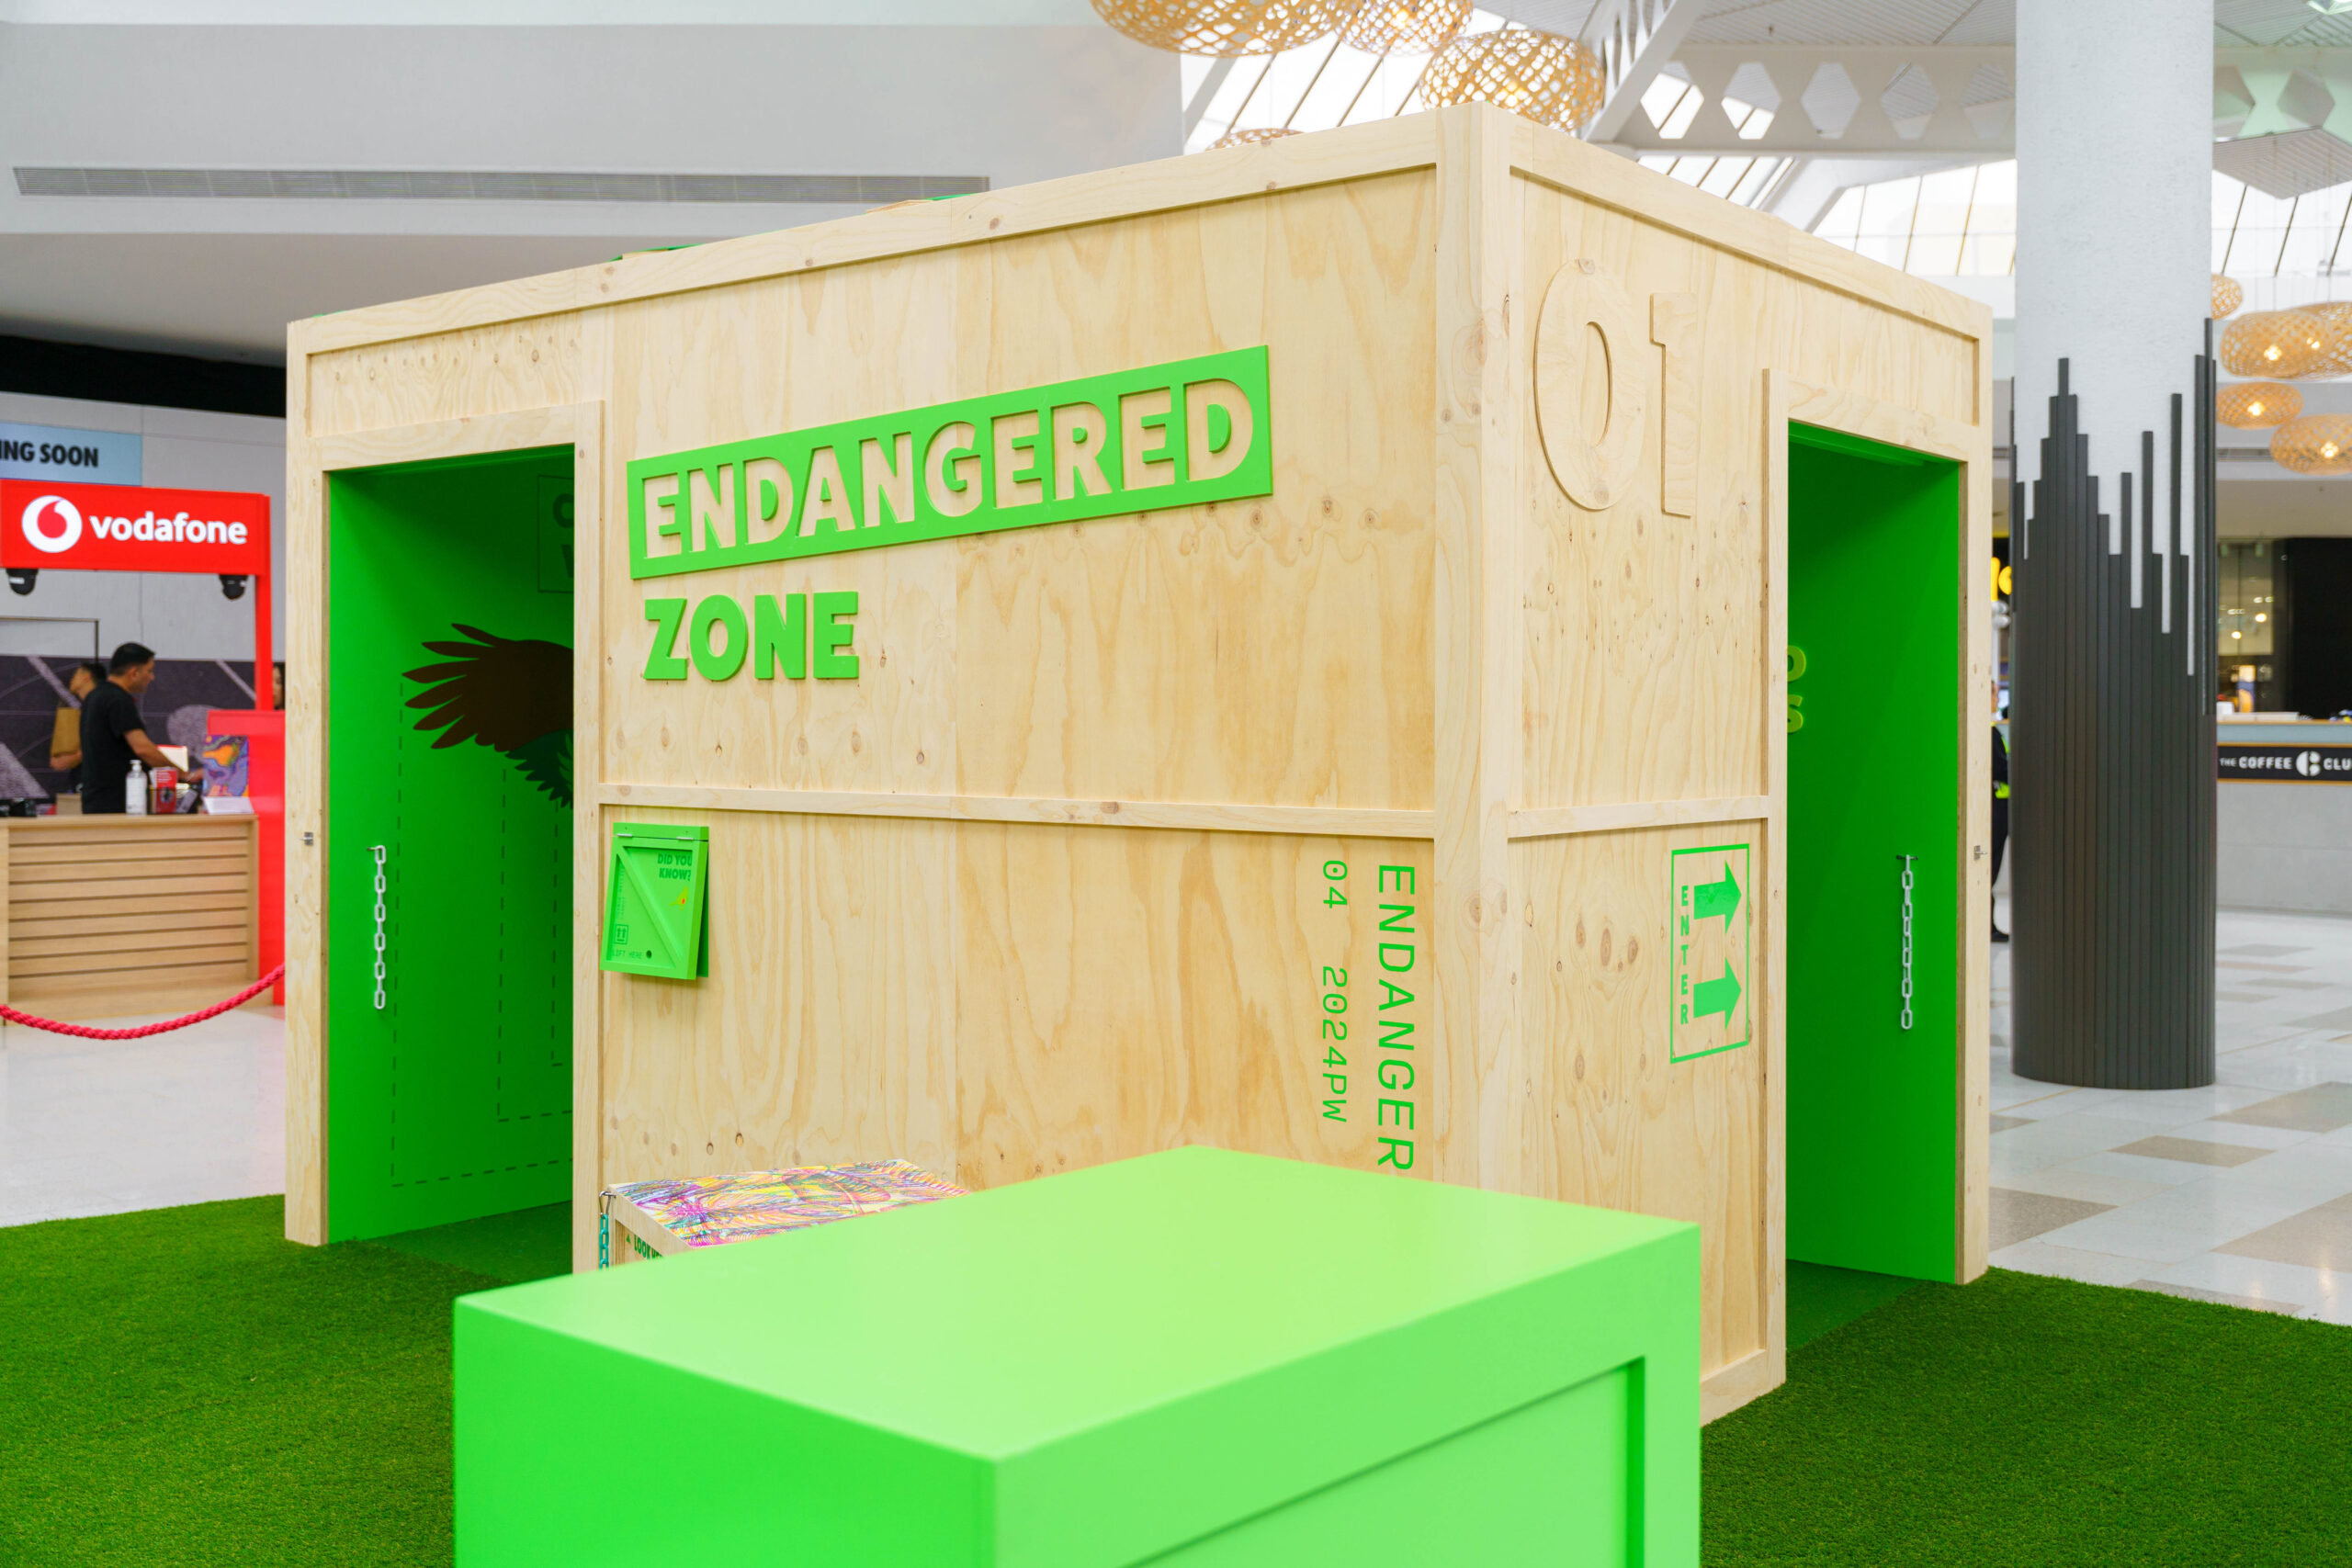 Wooden and Green Enclosed Set for Endangered Species Zone.